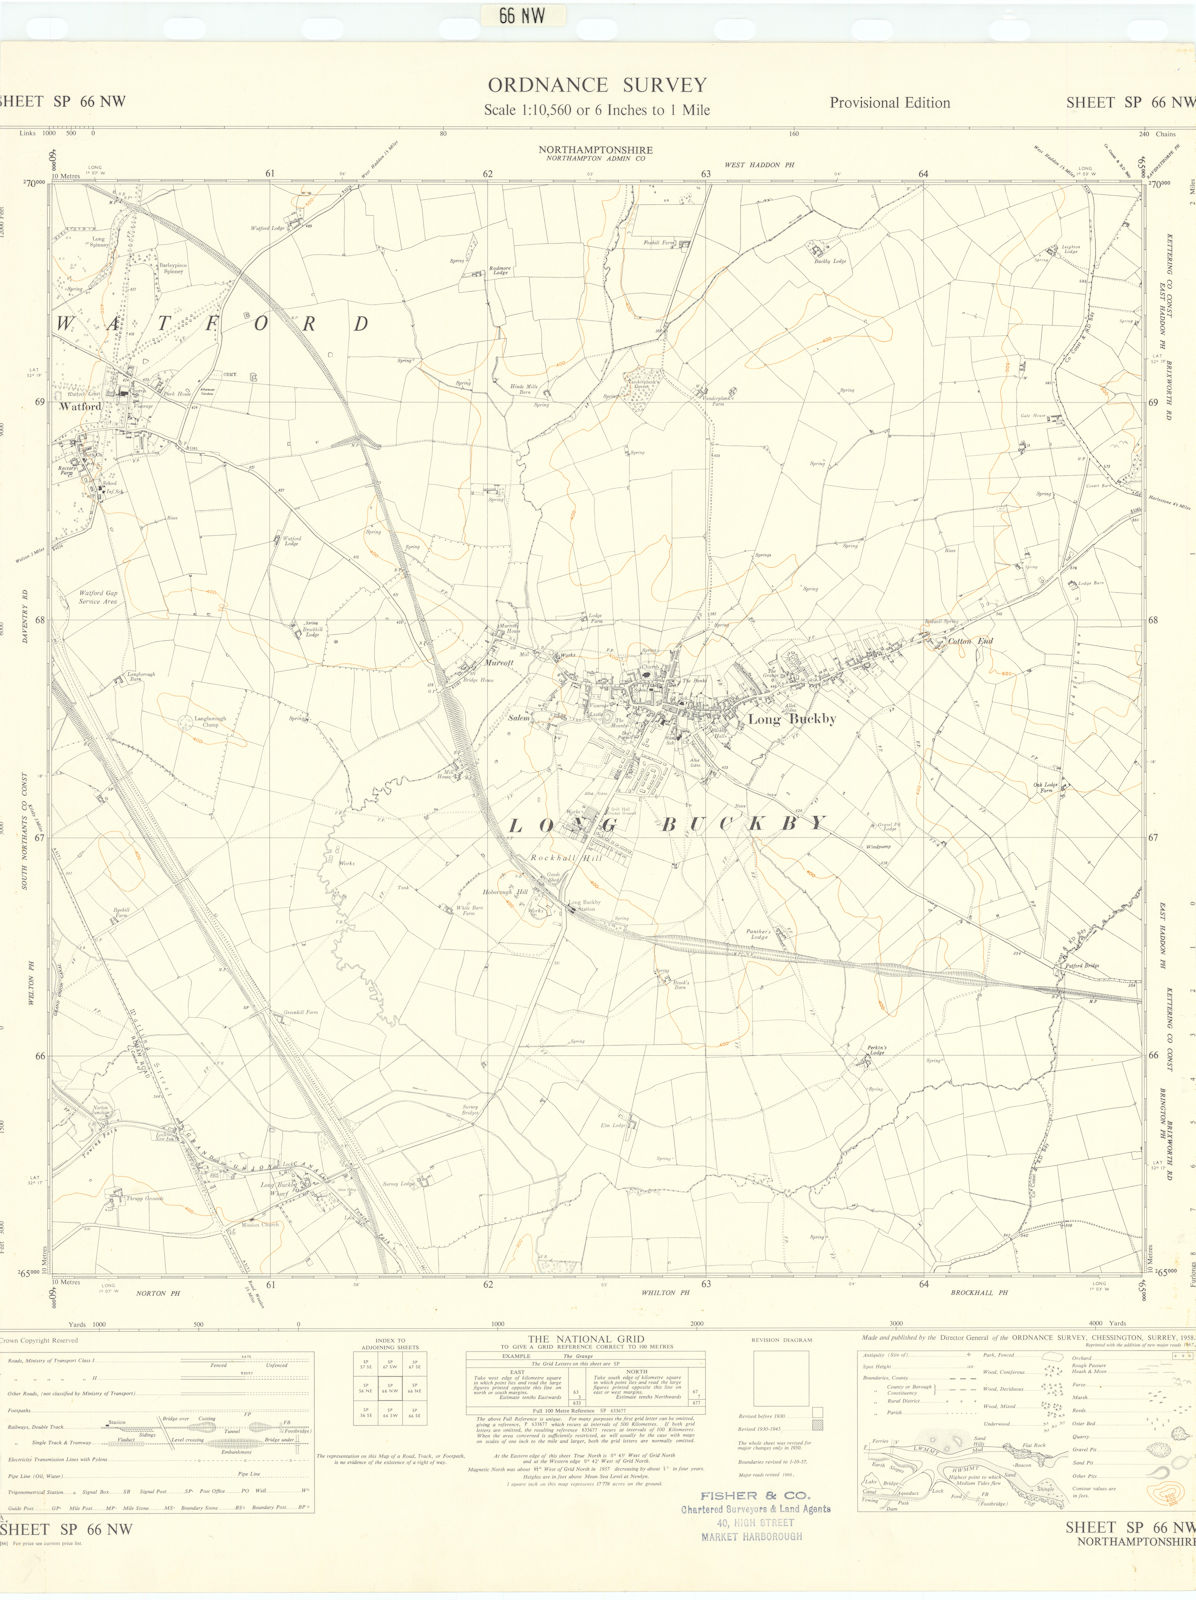 Ordnance Survey Sheet SP66NW Northamptonshire Long Buckby Watford 1958 old map